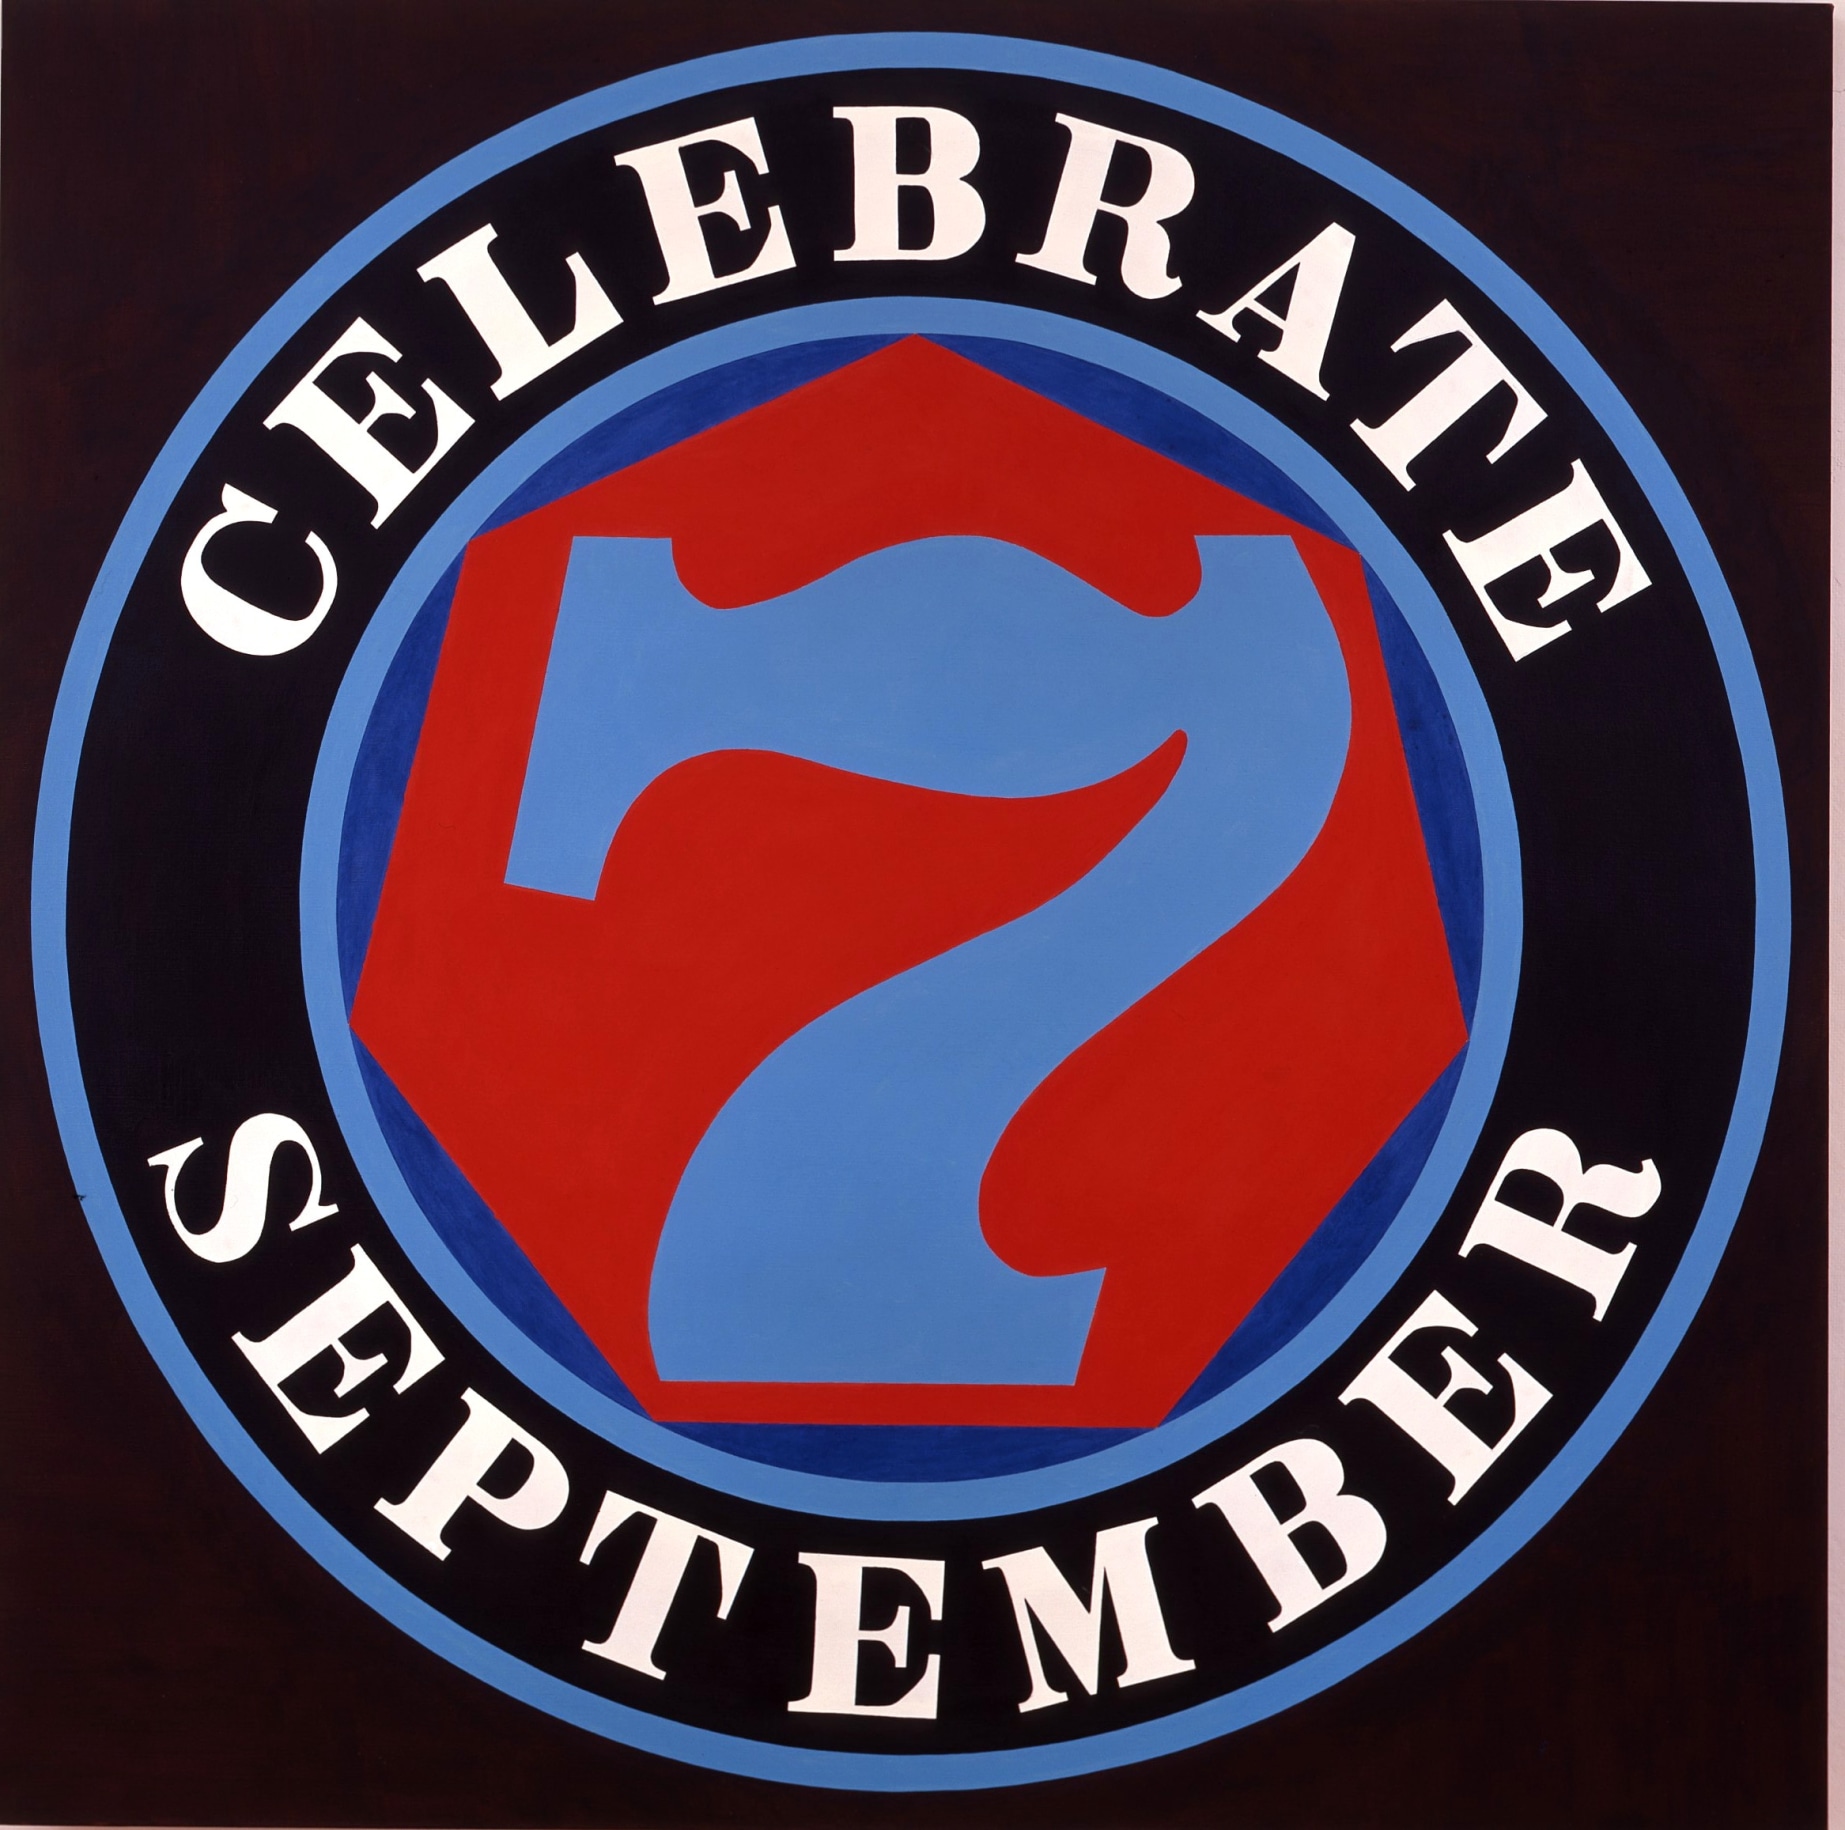 A square canvas with a black ground dominated by a circle containing a red heptagon with a blue numeral seven, and surrounded by a black ring with blue outlines. Within the ring the painting's title, &quot;Celebrate September&quot; is painted in white letters.